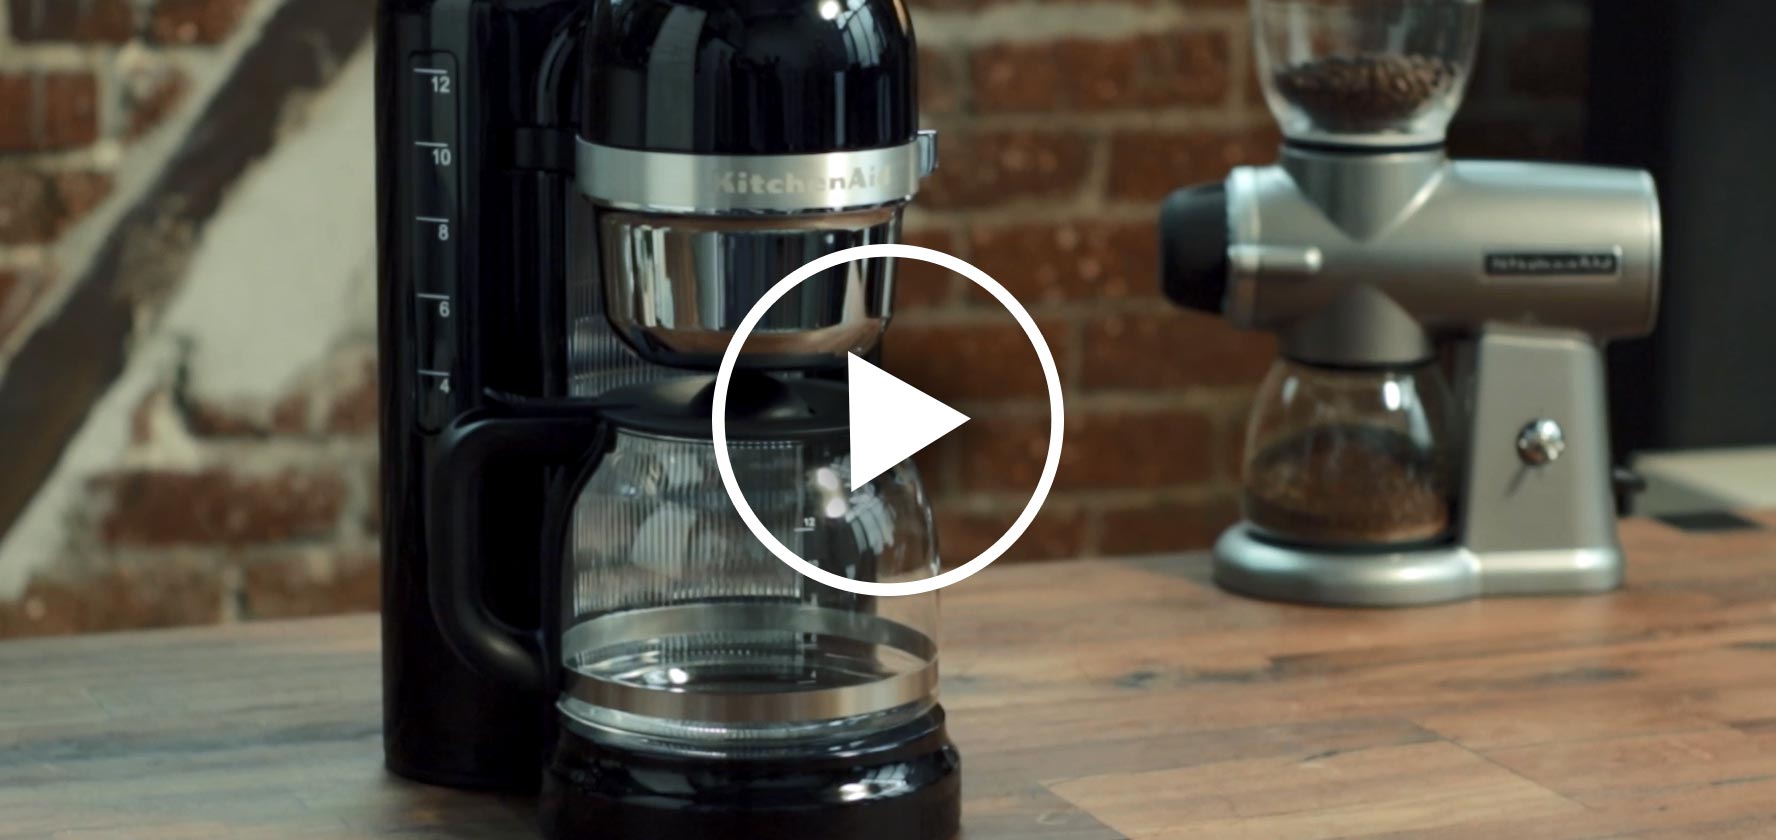 https://www.multivu.com/players/English/7766753-kitchenaid-new-coffee-products/video/new-craft-coffee-products-from-kitchenaid-1-HR.jpg